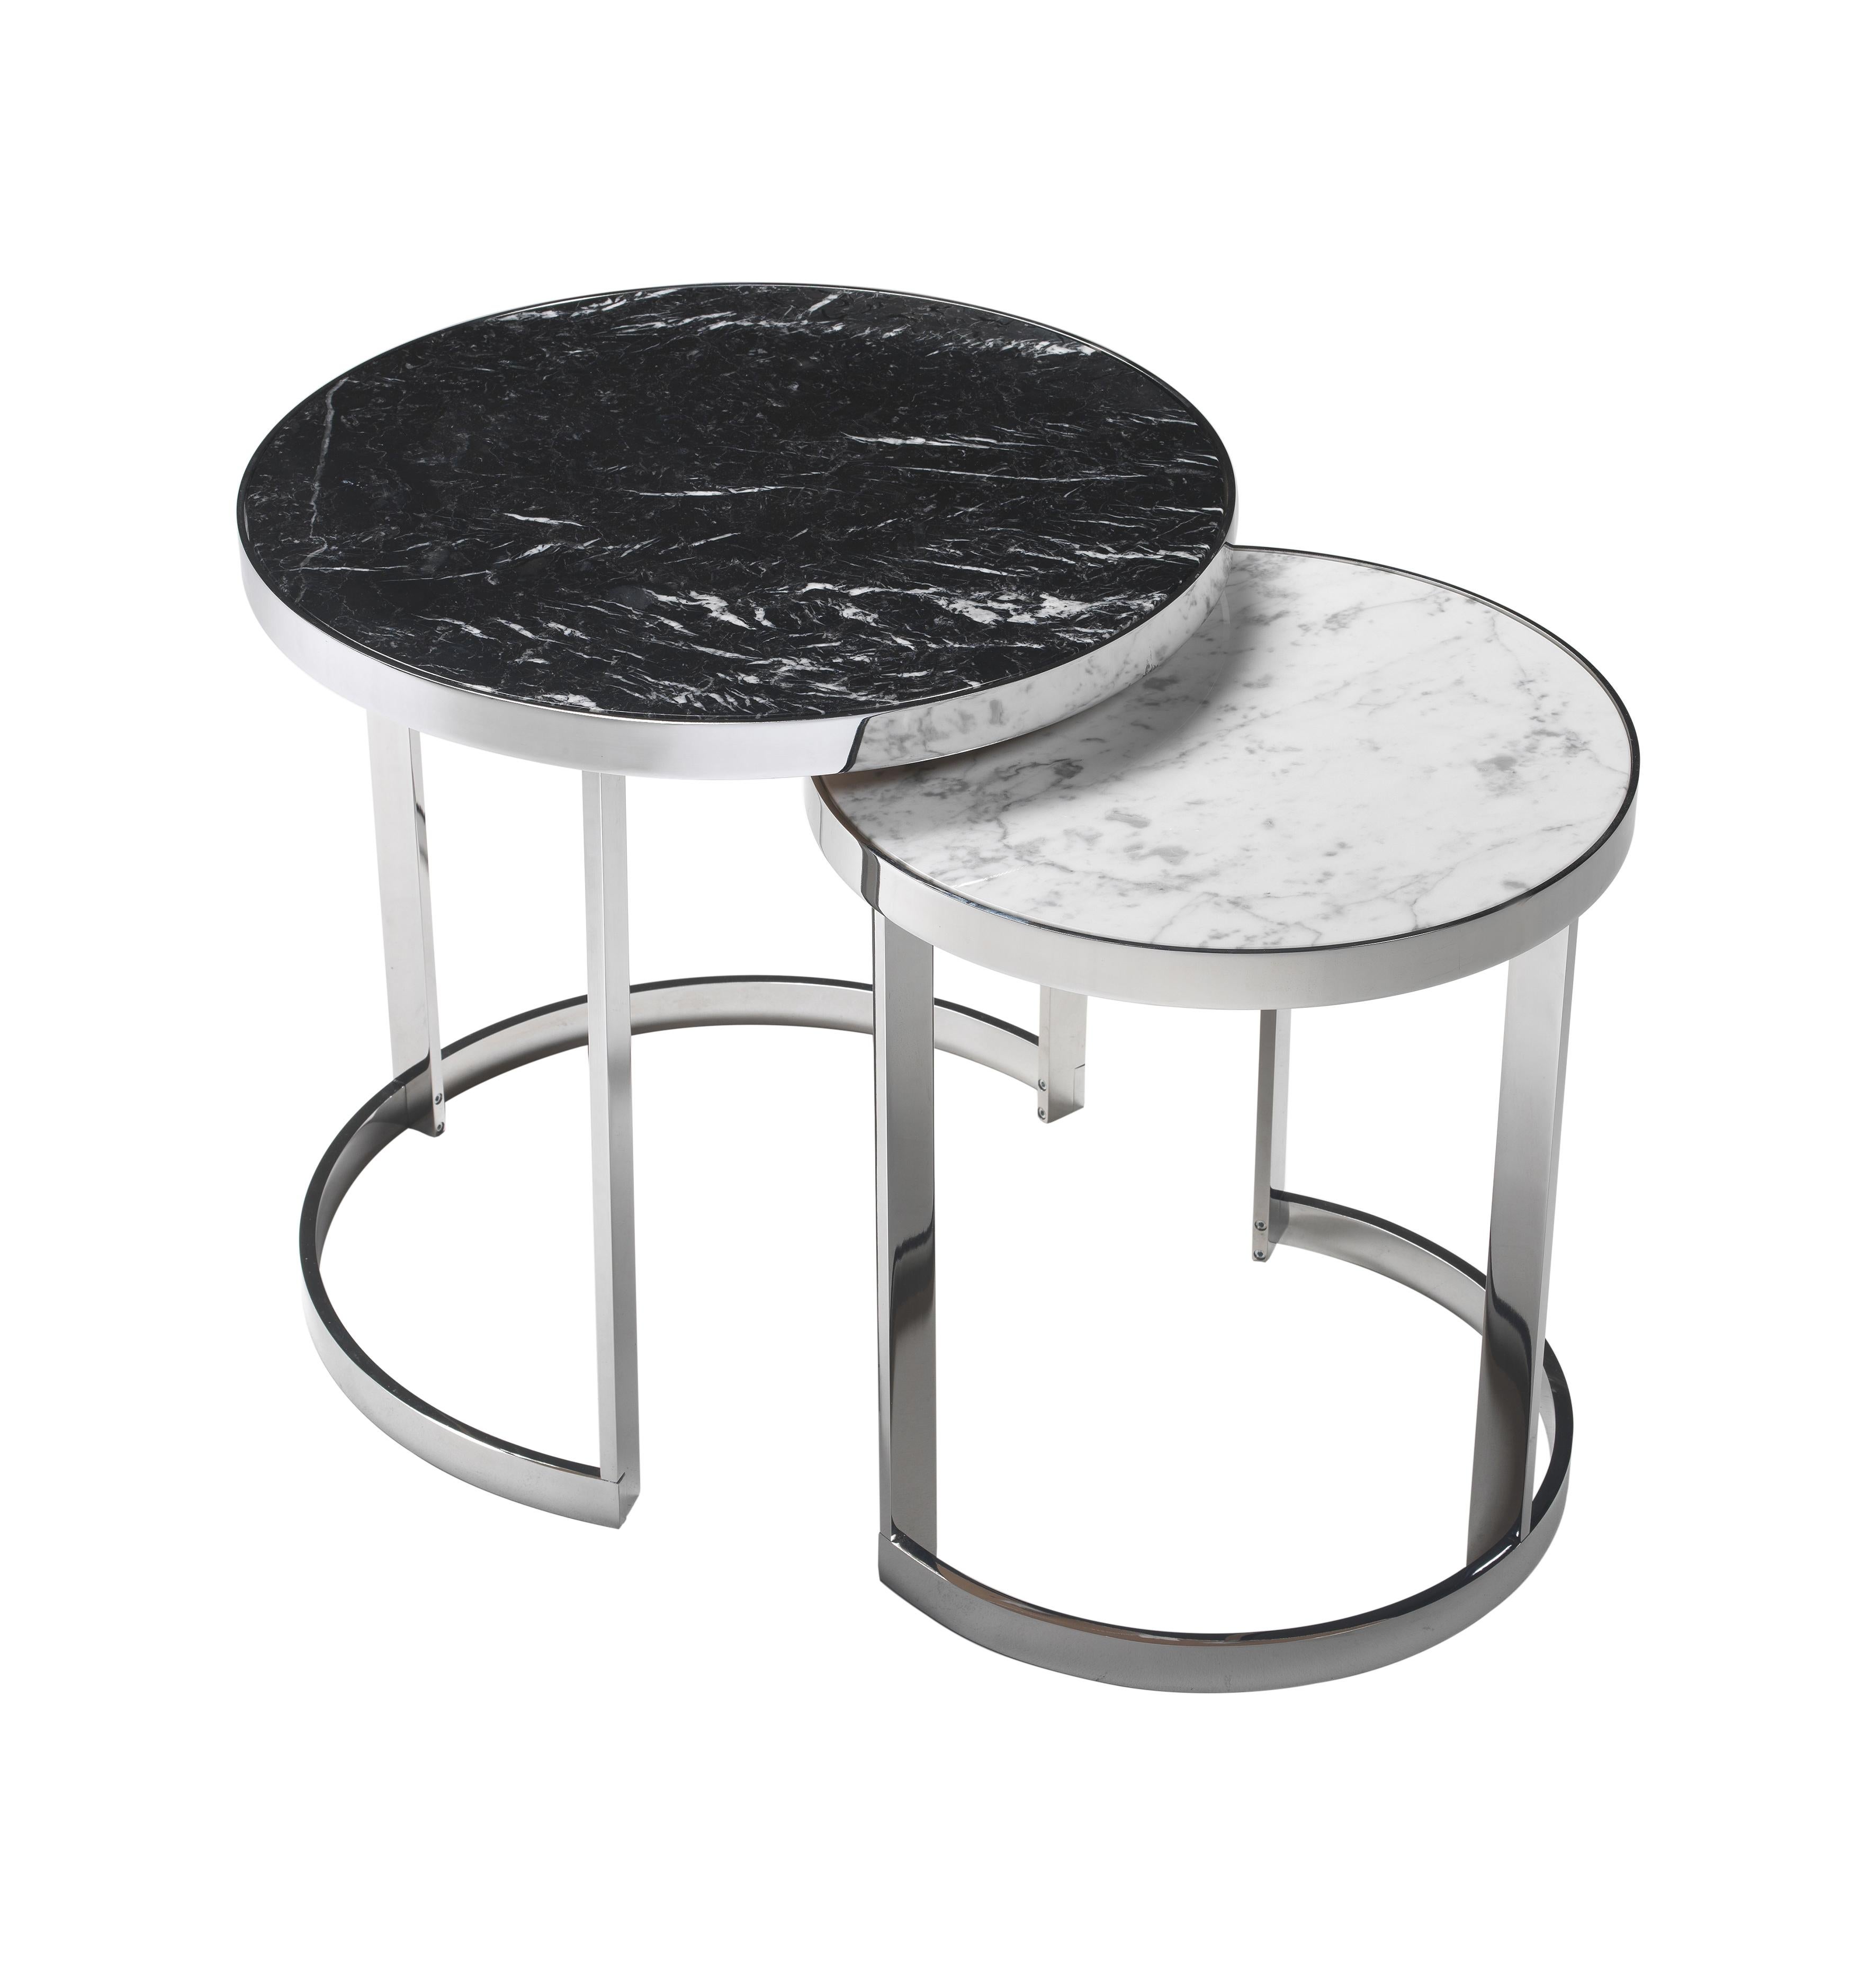 Moon modern Italian set of two side tables (diameter 50 cm and diameter 40 cm) with metal chrome base and special marble top (Carrara and black Marquinia marbles).

Please note: Prices do not include VAT. VAT may be added depending on the ship-to